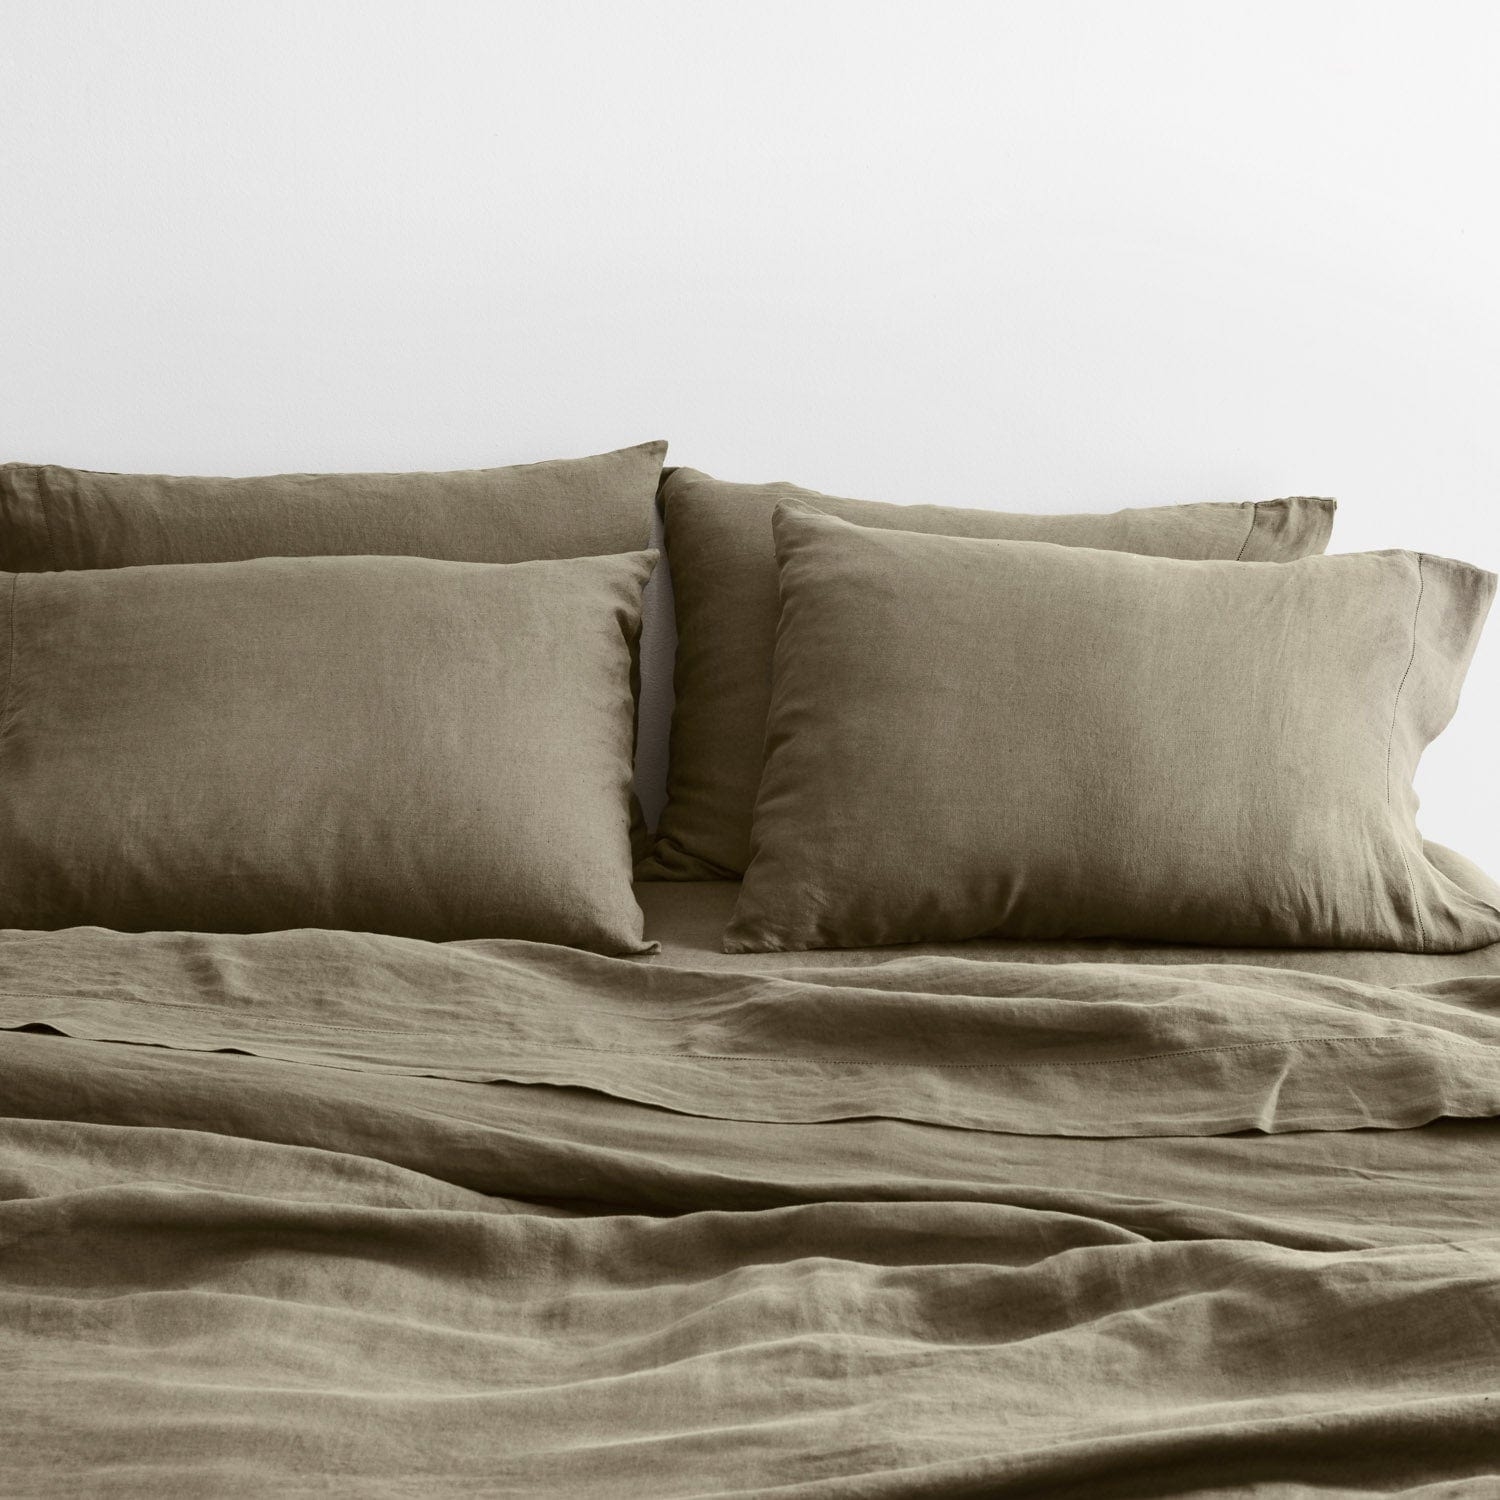 The Citizenry Stonewashed Linen Bed Bundle | Queen | Seaglass - Image 4